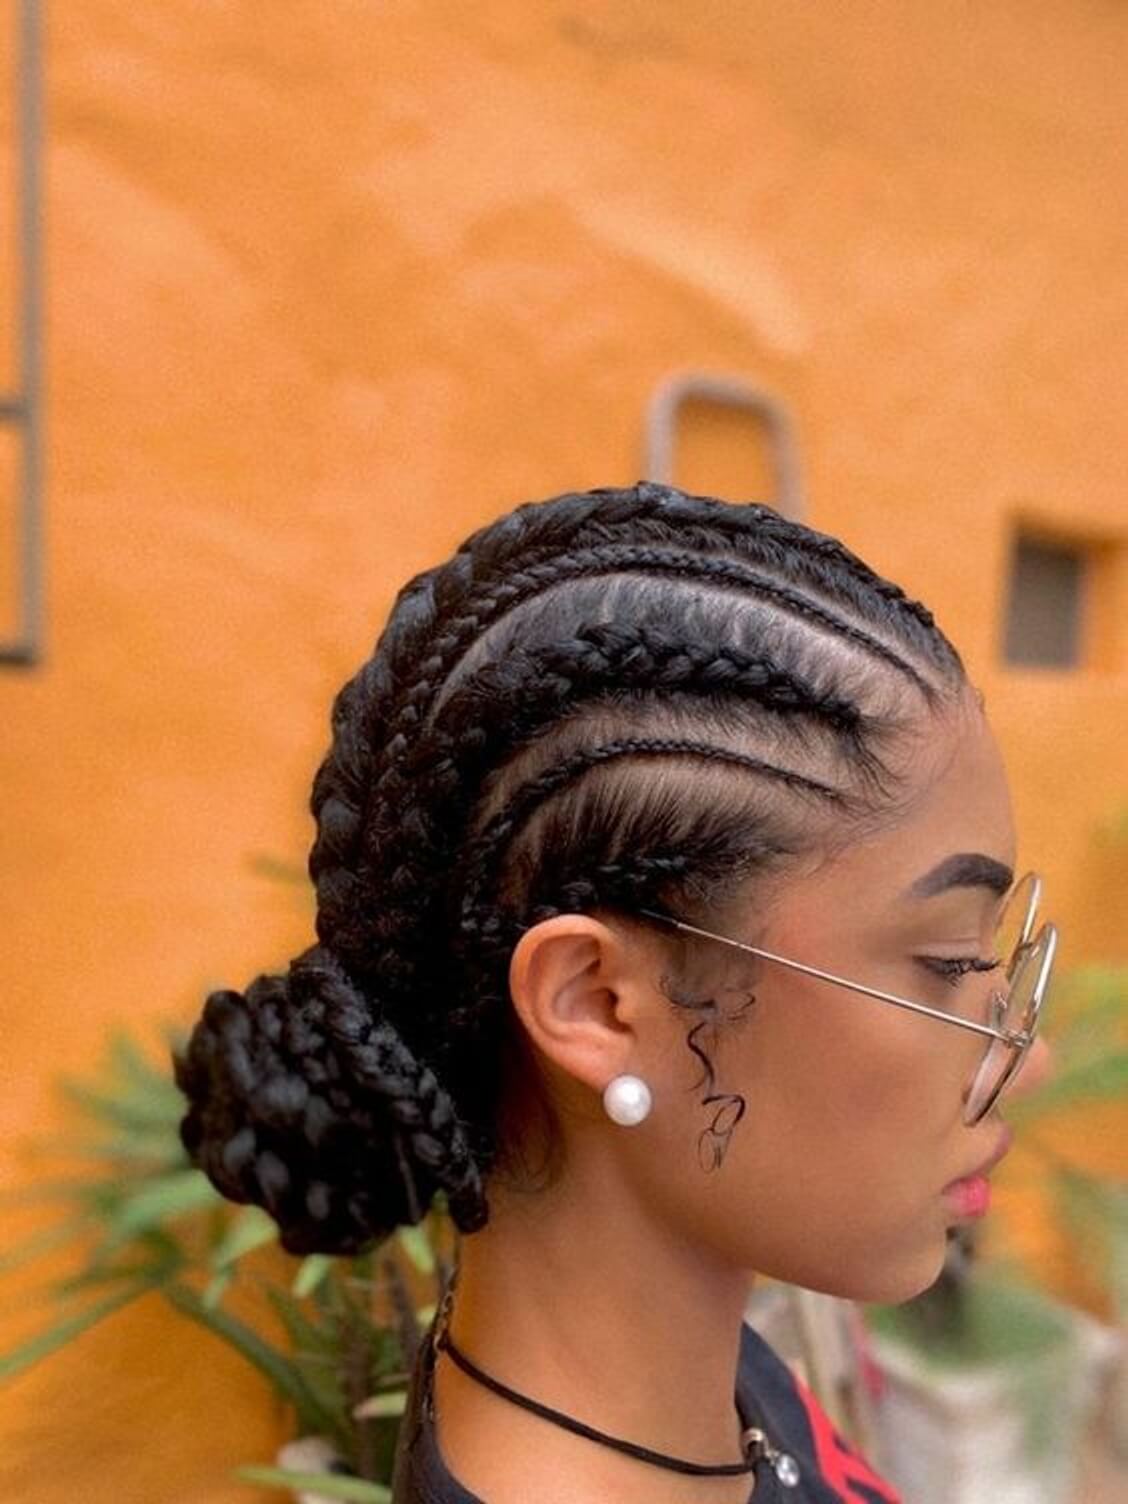 50 Trendy Braided Hairstyles To Instantly Glam Up Your Look - 339